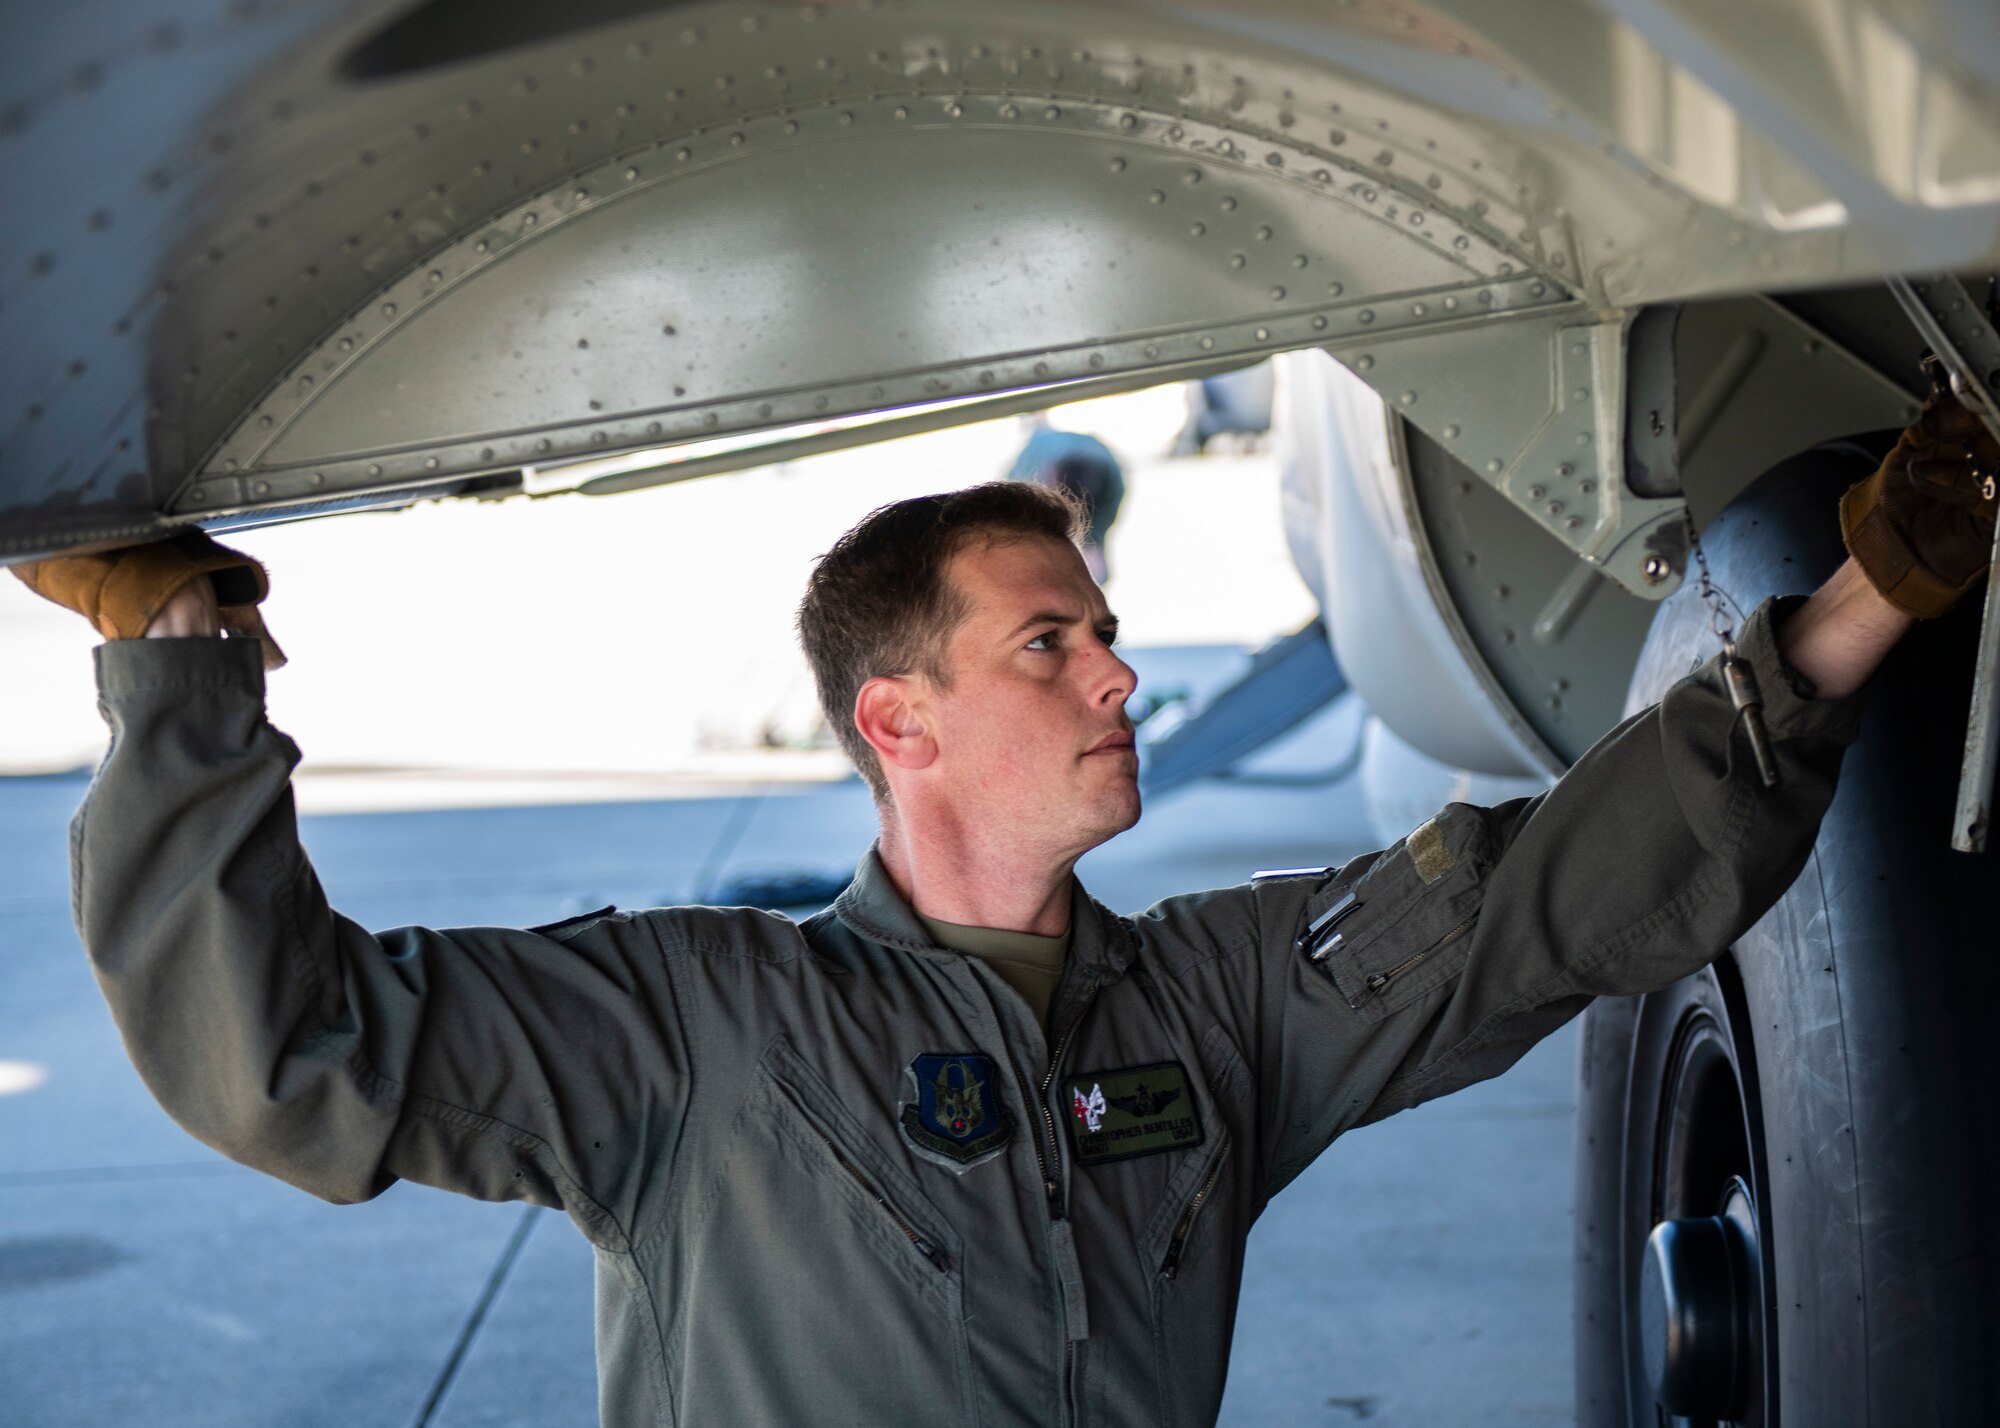 Senior Master Sgt. Christopher Sentilles, 5th Special Operations Squadron special mission aviator instructor, was nominated for the Pitsenbarger award because of his heroic actions after the accident.